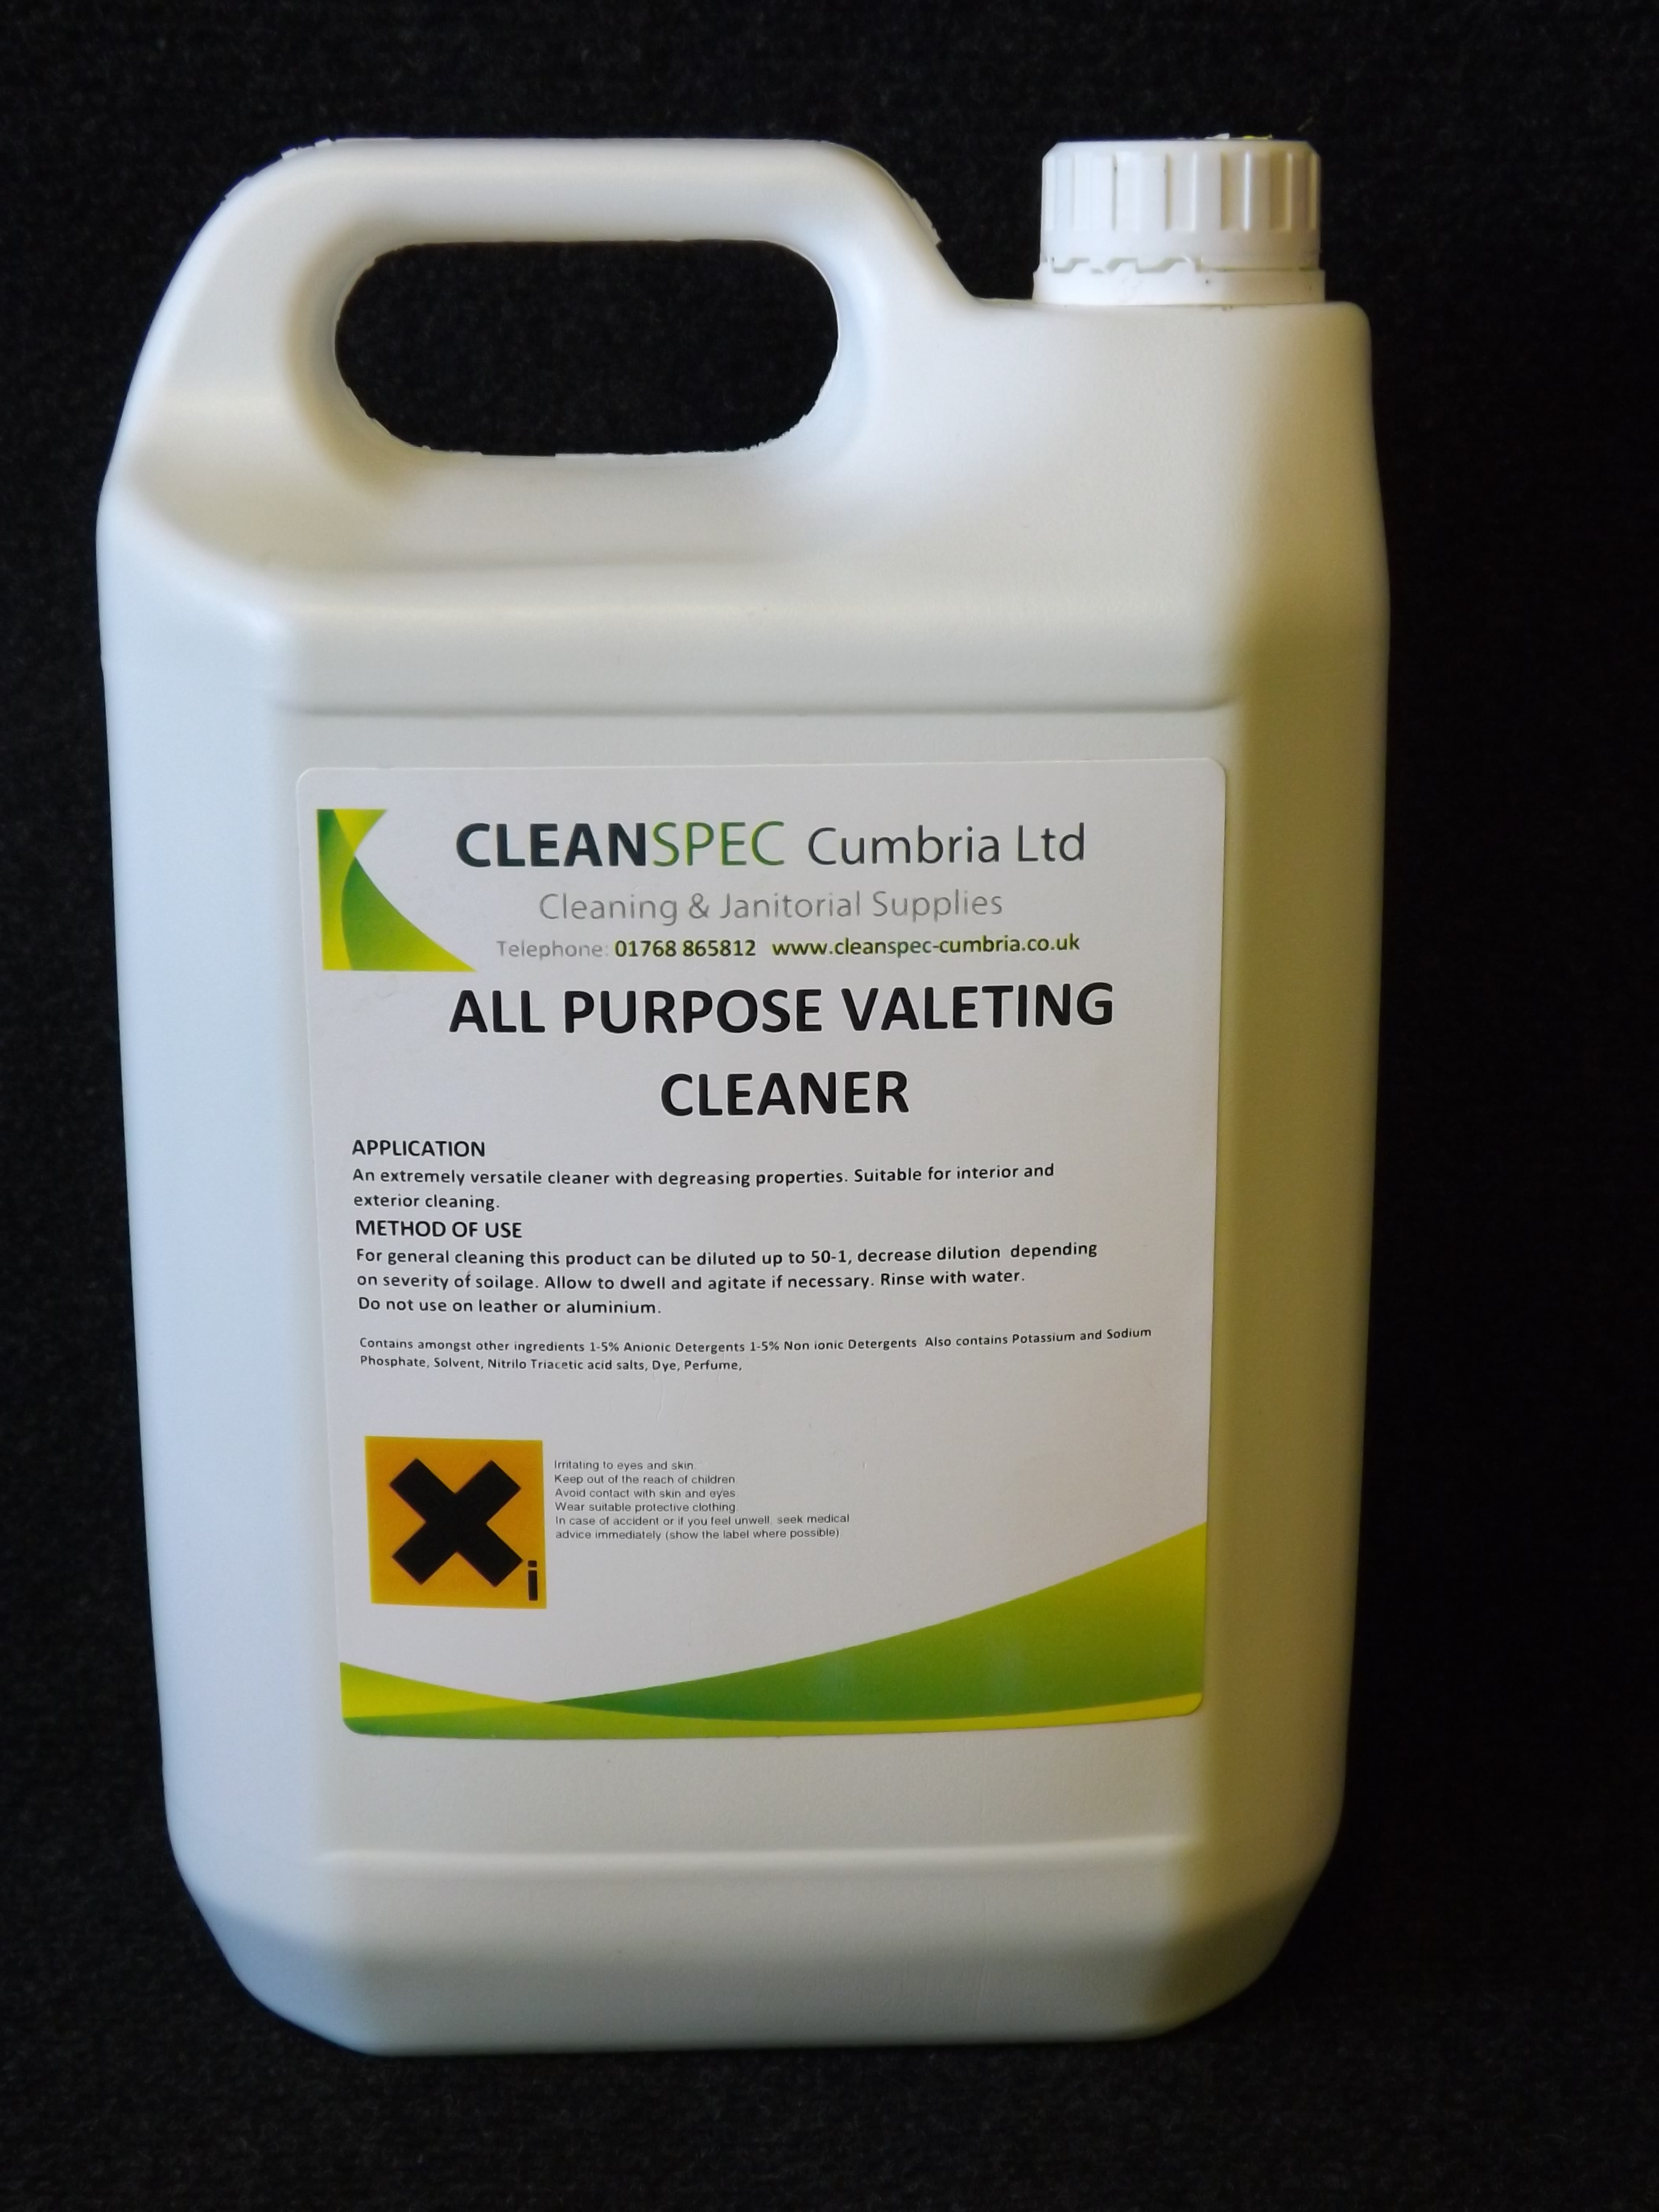 All Purpose Valeting Cleaner